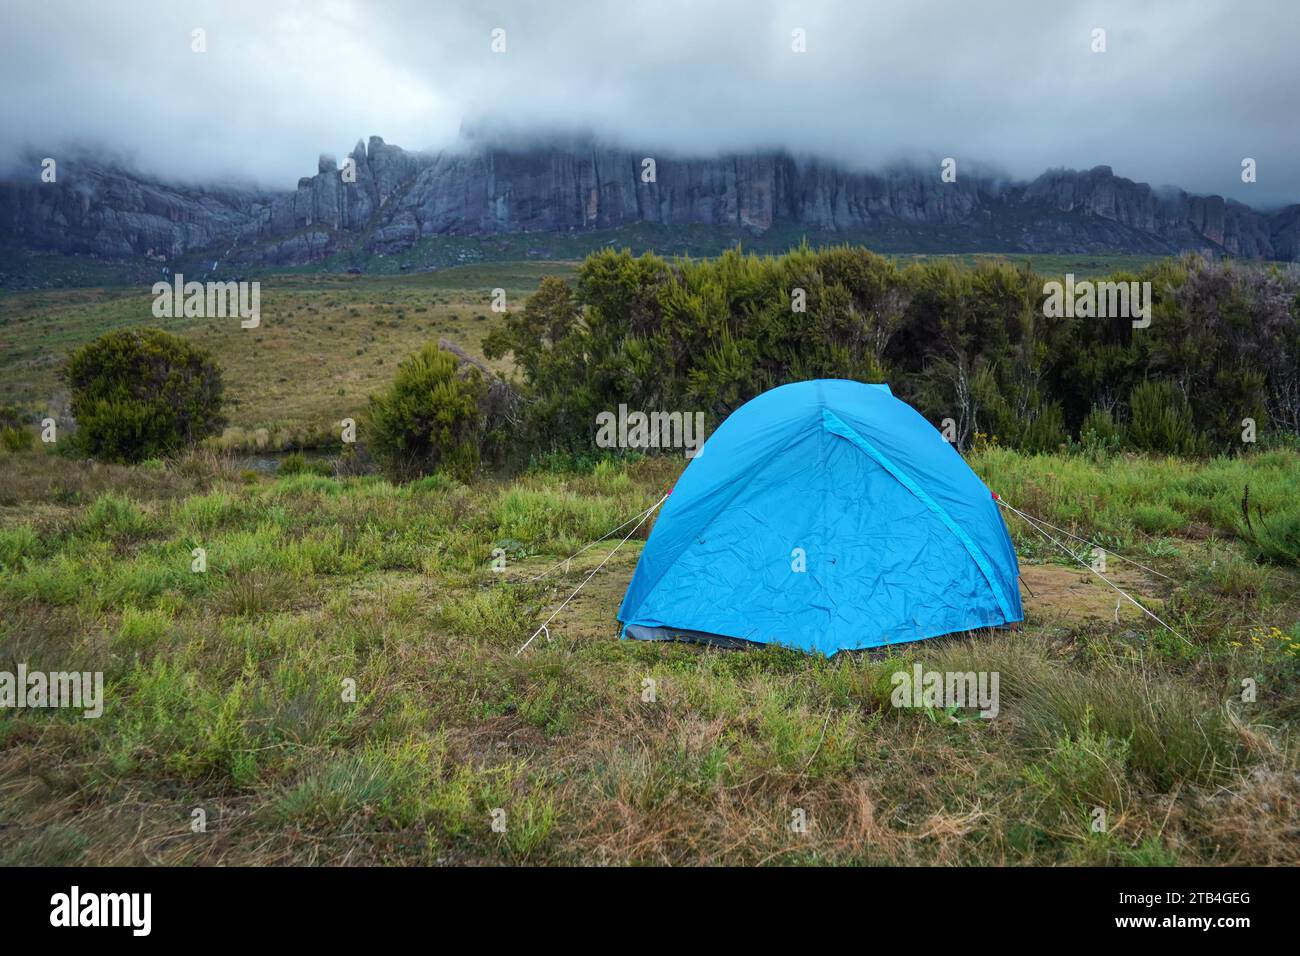 Evening mist rolling over mountains, blue tent in foreground - landscape at Pic Boby base camp, typical scenery of Andringitra national park, Madagasc Stock Photo